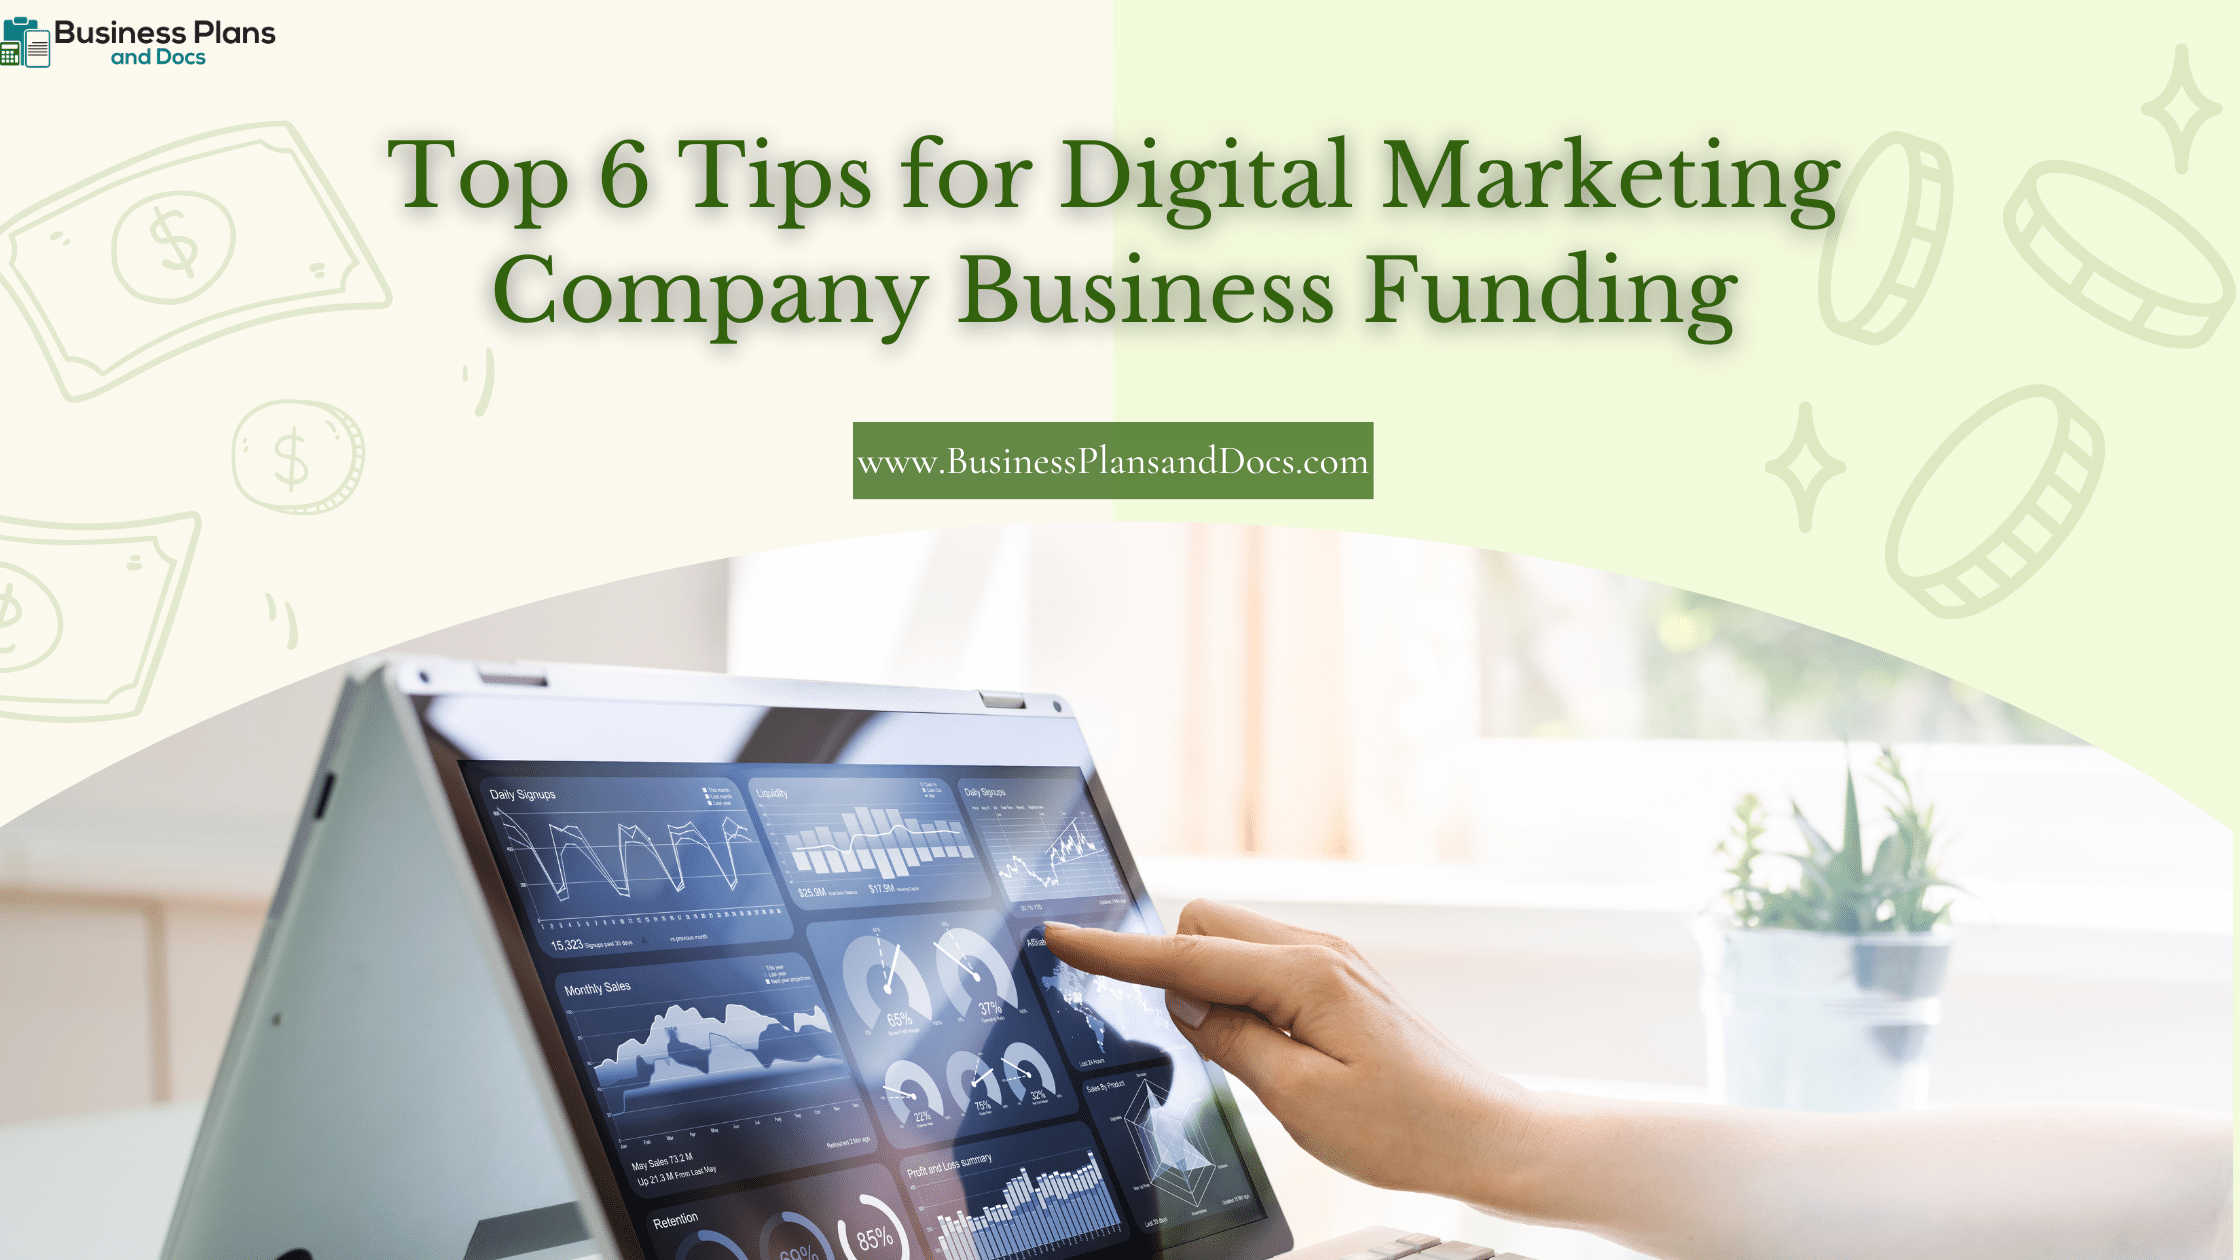 Top 6 Tips for Digital Marketing Company Business Funding